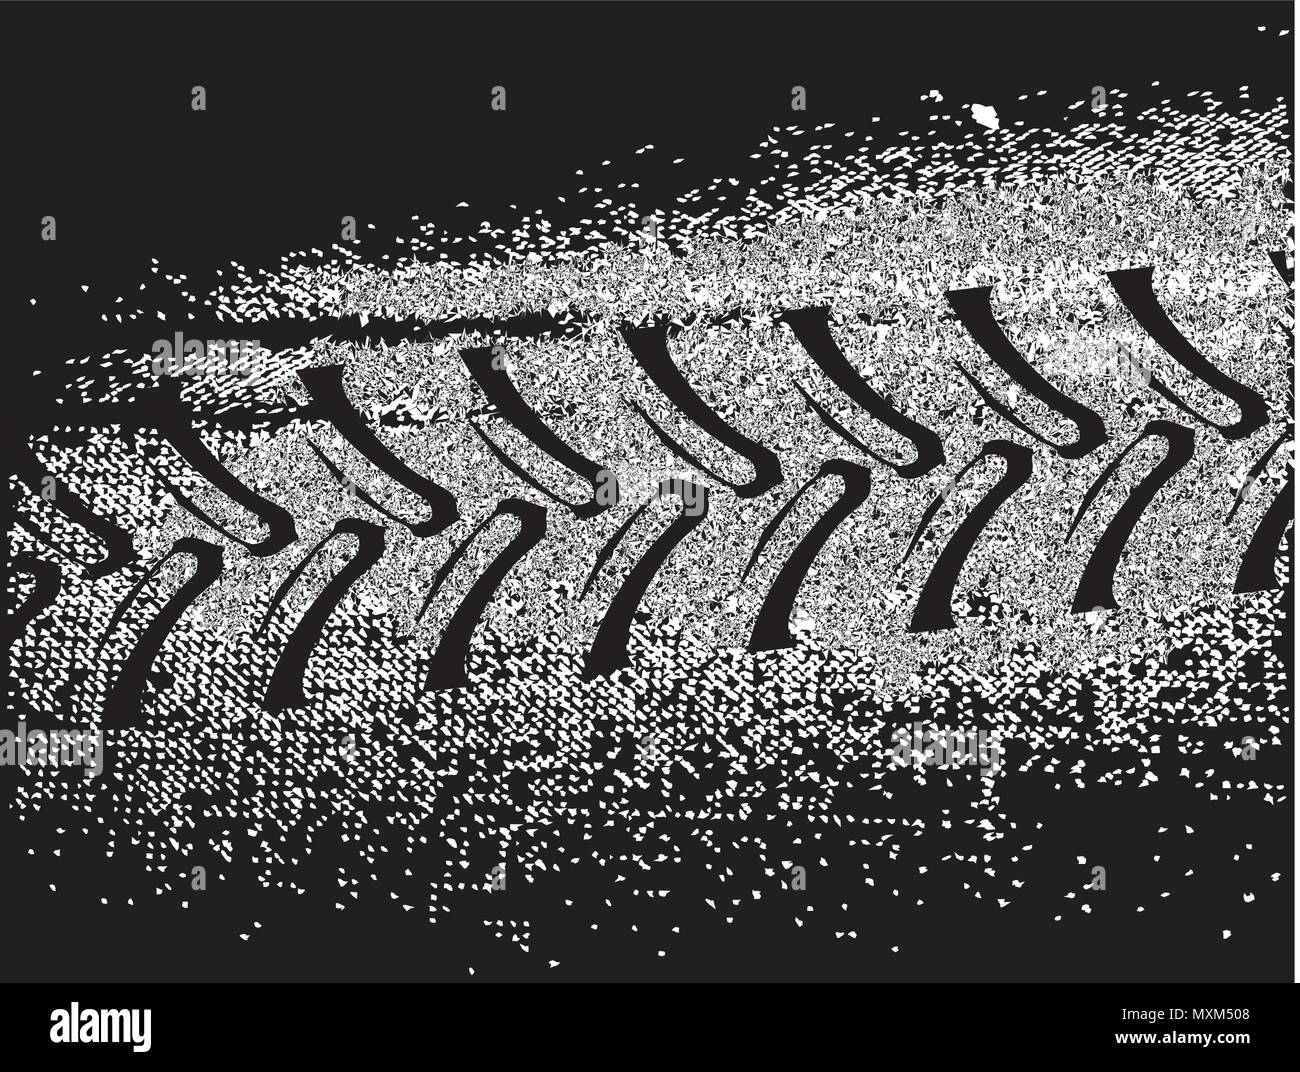 One track from a heavy farm vehicle over a heavy grunge black and white background Stock Vector